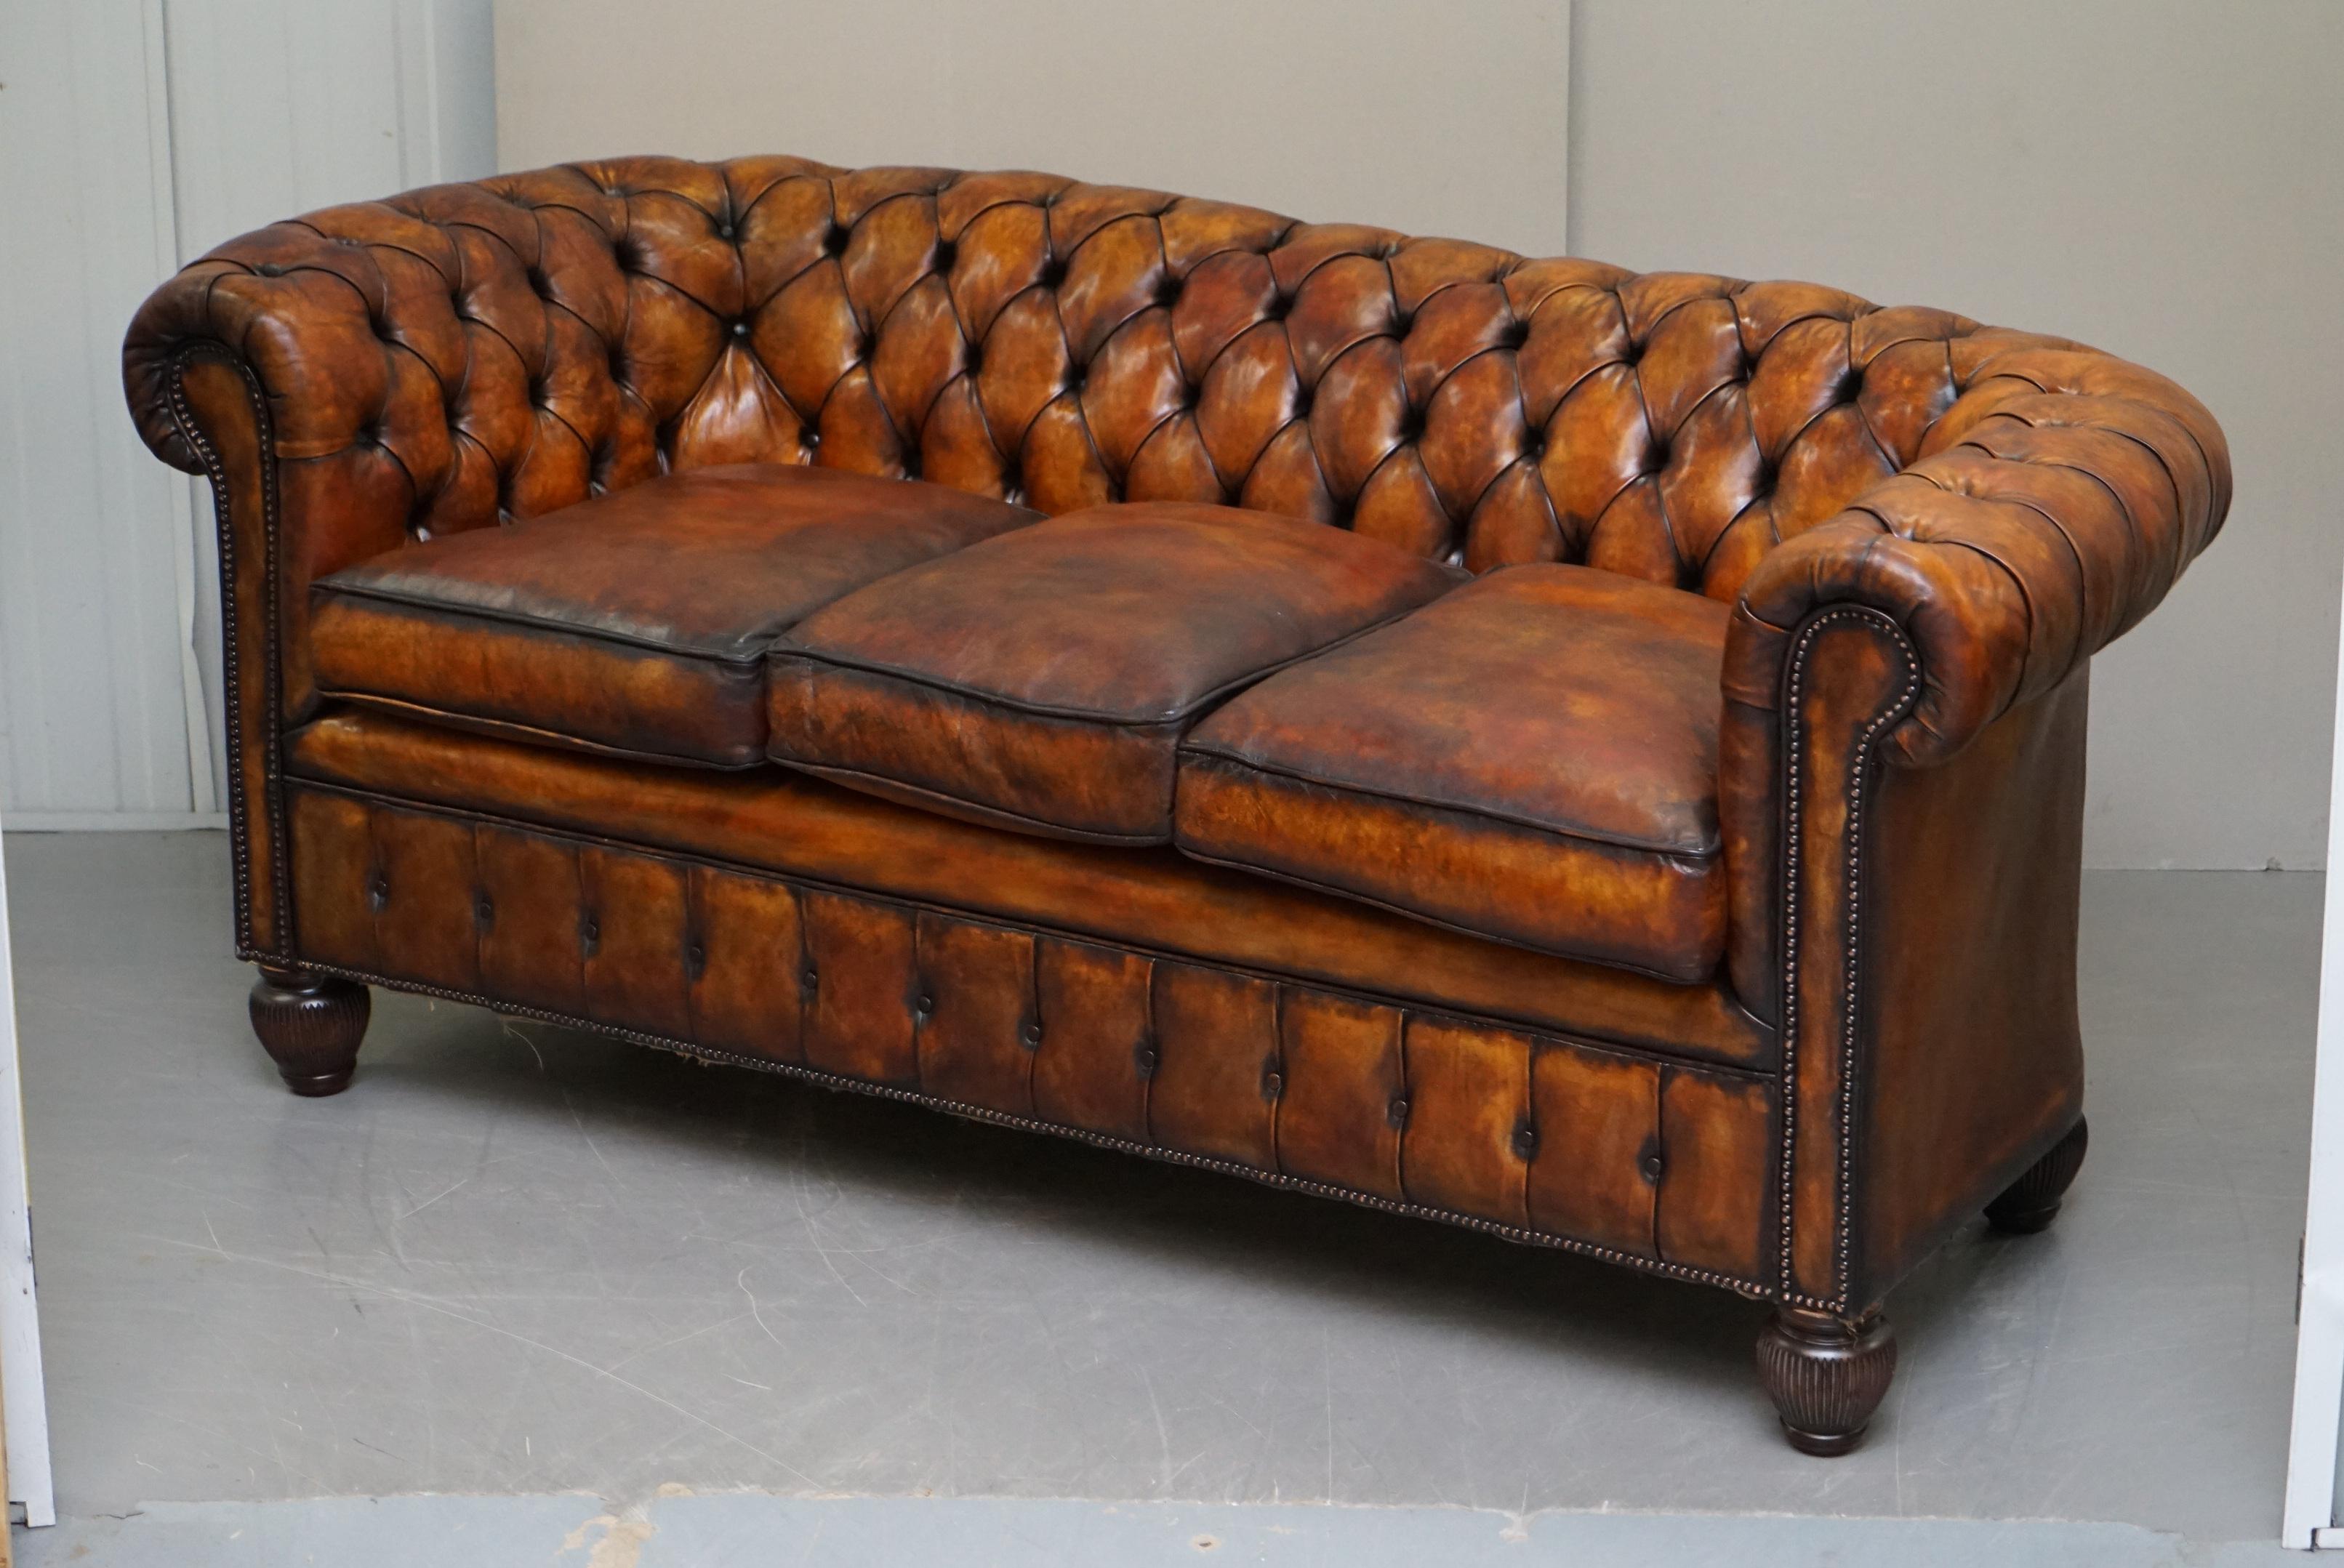 1900 couch